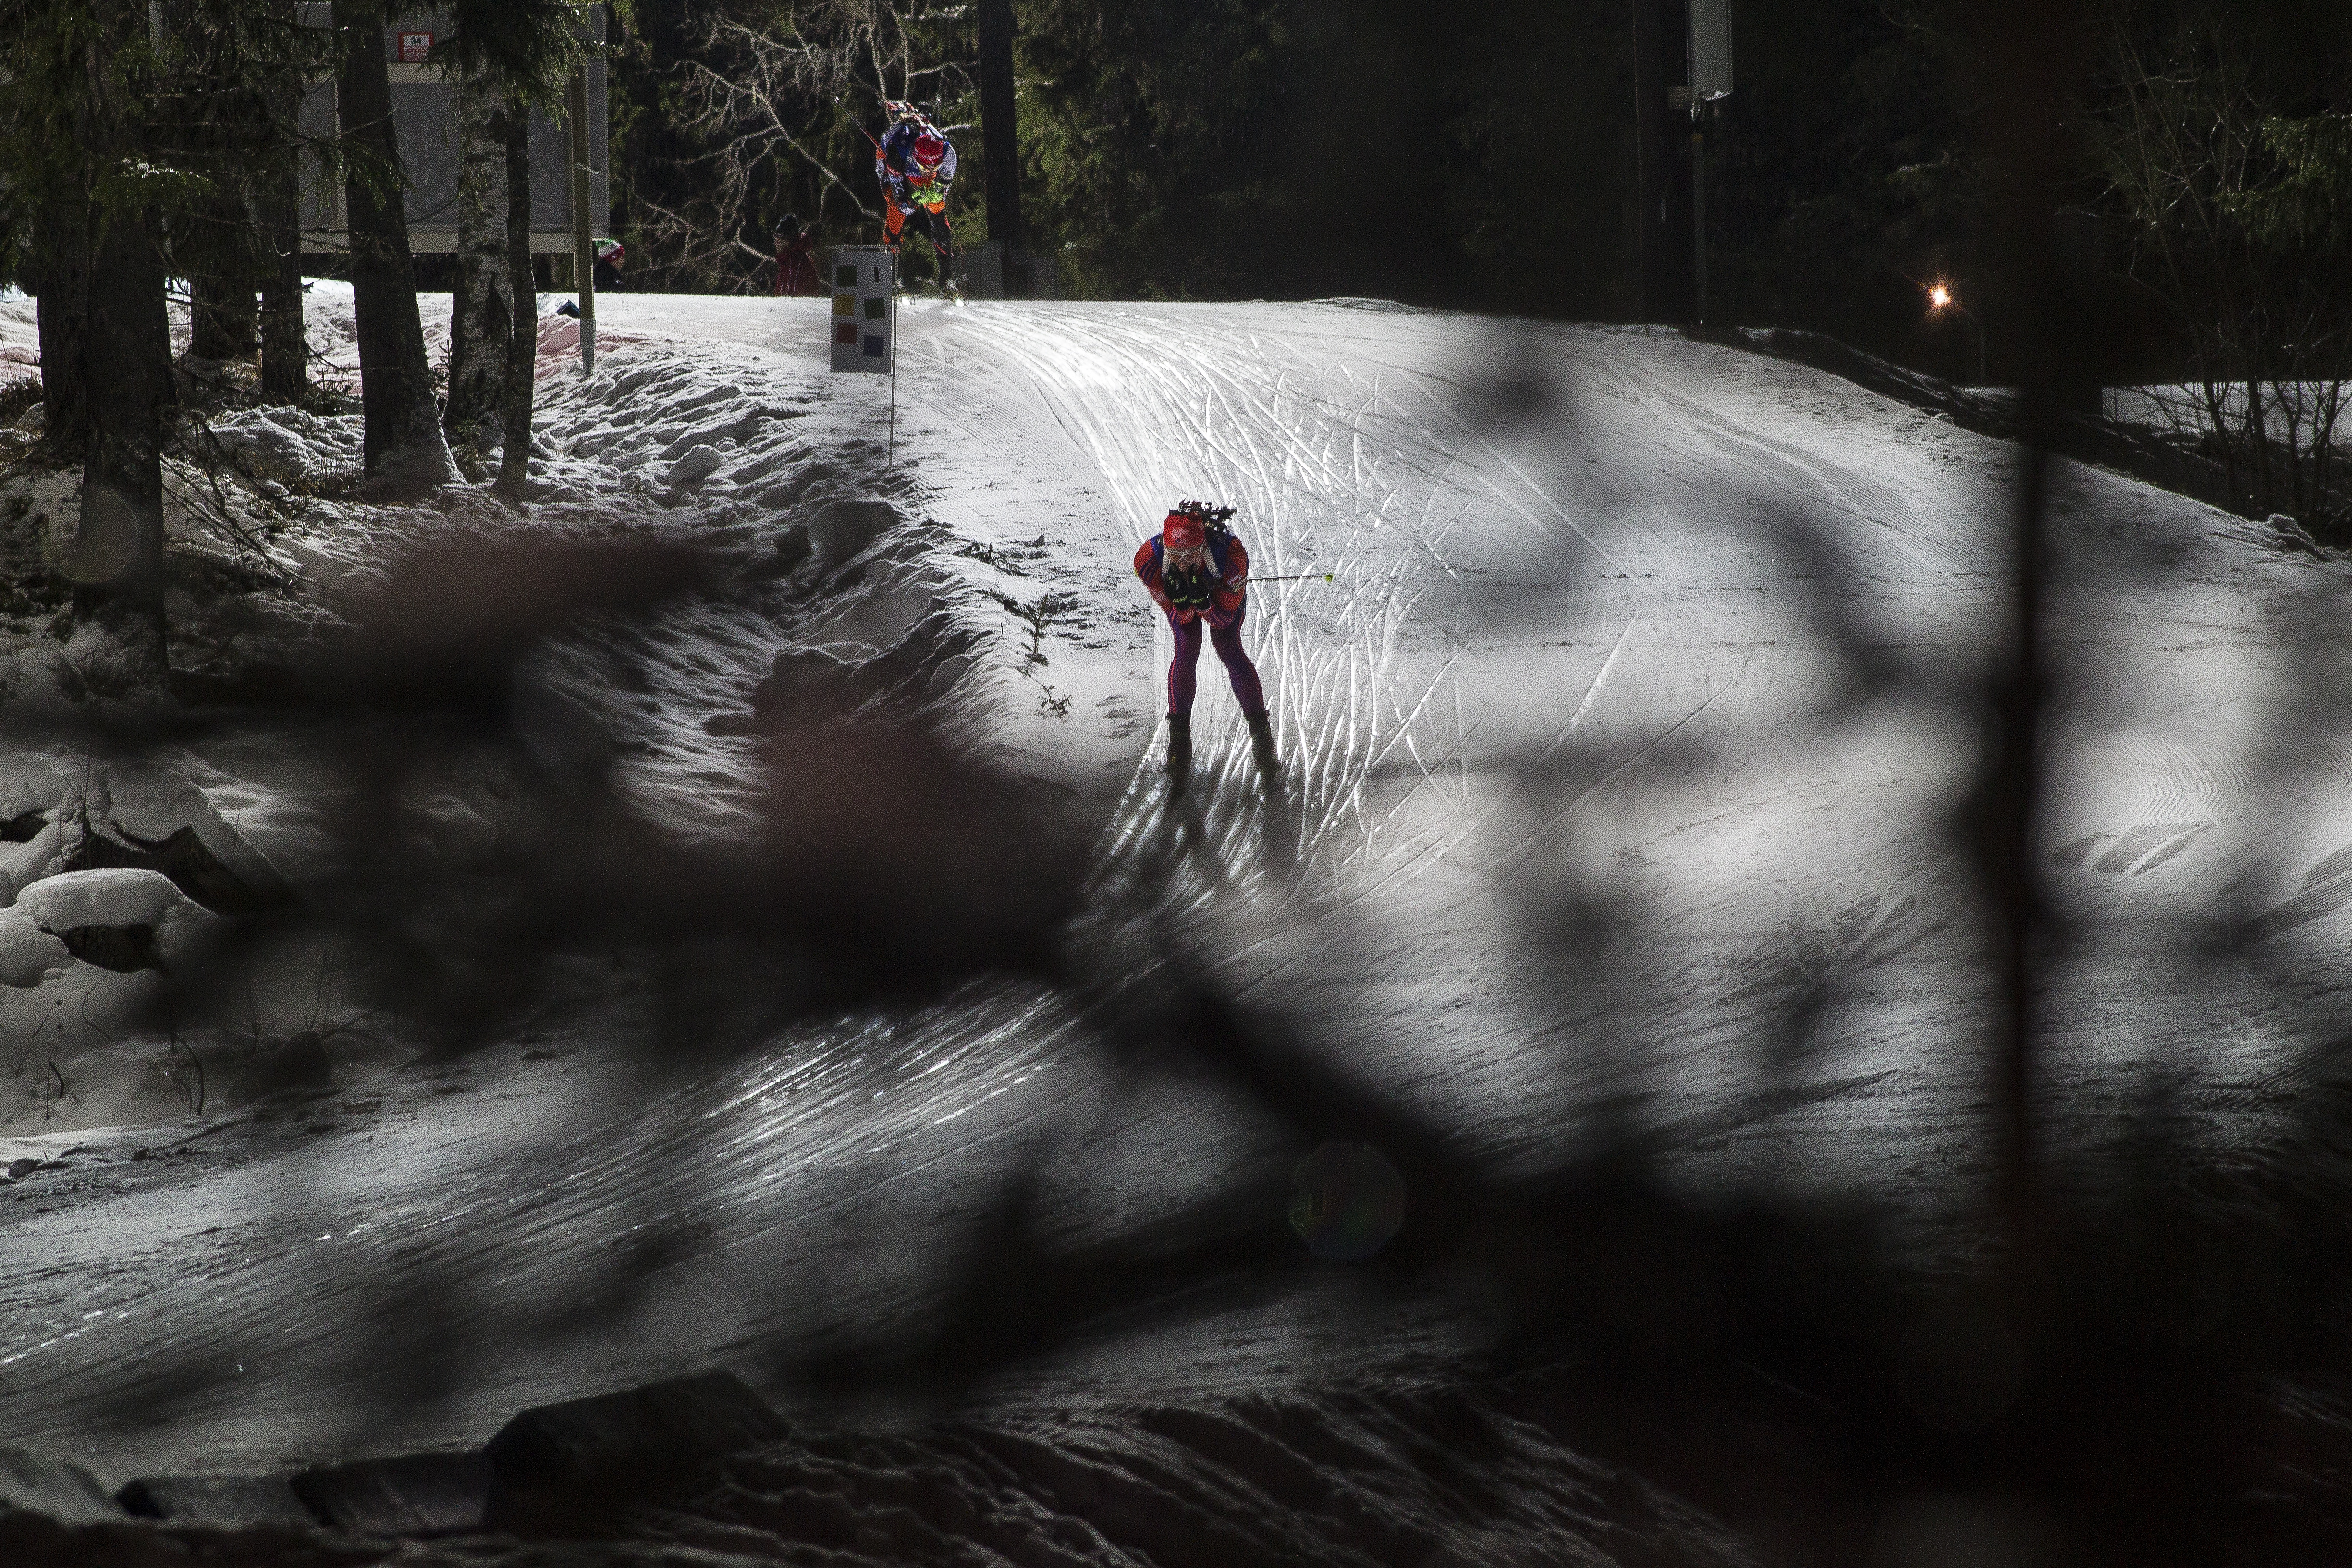 Sean Doherty takes a downhill under the bright lights of the Oestersund trails. The 20-year-old American finished 17th in the first individual World Cup race of the season. (Photo: U.S. Biathlon / NordicFocus)